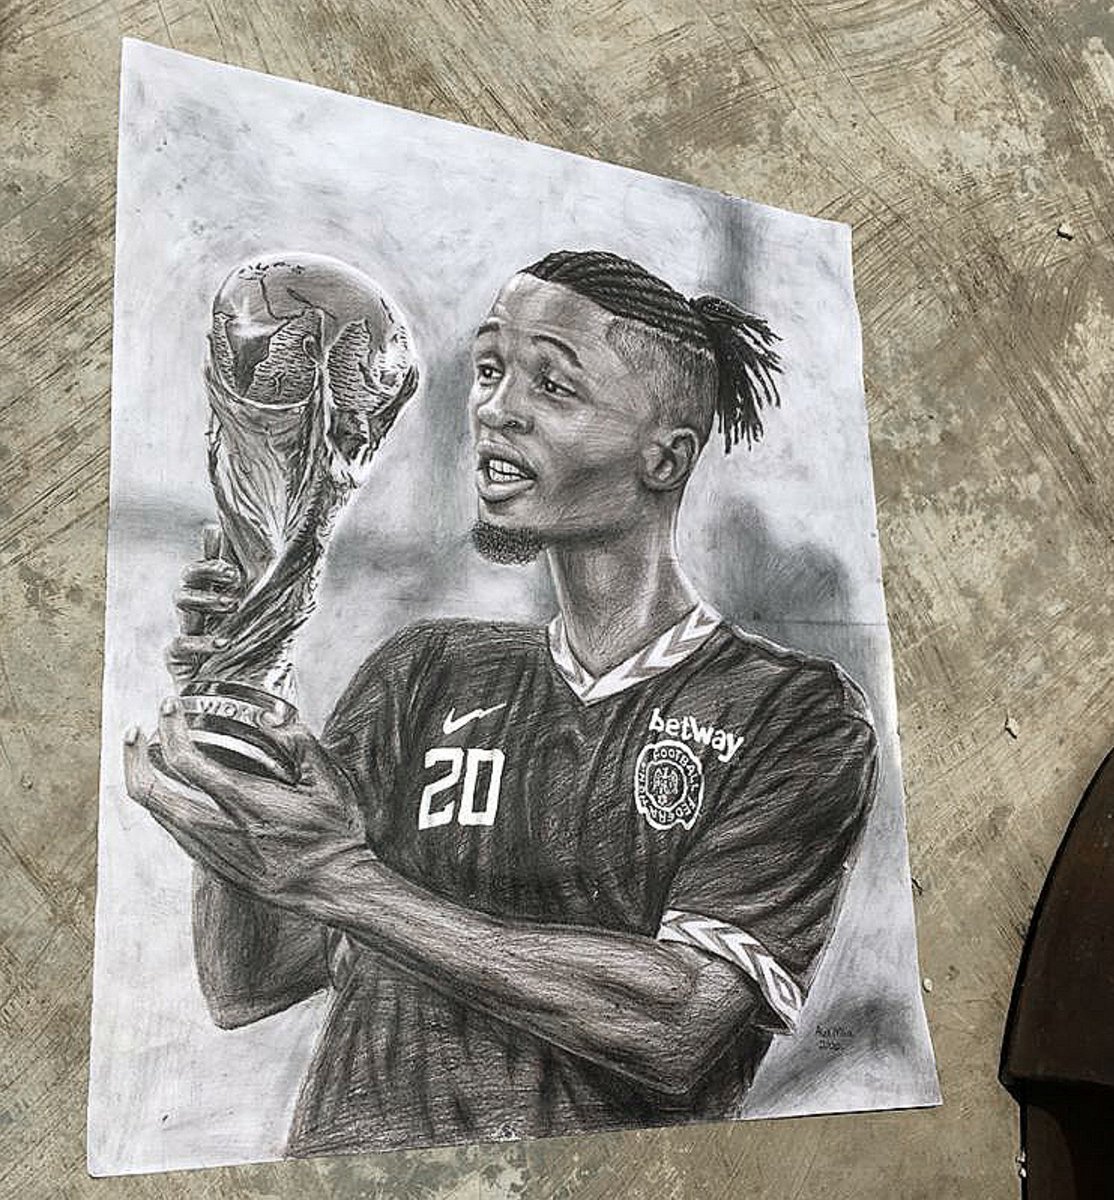 Earlier, his account was suspended causing his entry to be overlooked. It's been brought to our attention that he's gotten it back, so the 6th and final entry is from  @har_leks A drawing of  #BBLaycon as a footballer What say you? Check below to vote  #BETWAYFYI  #BBNaija